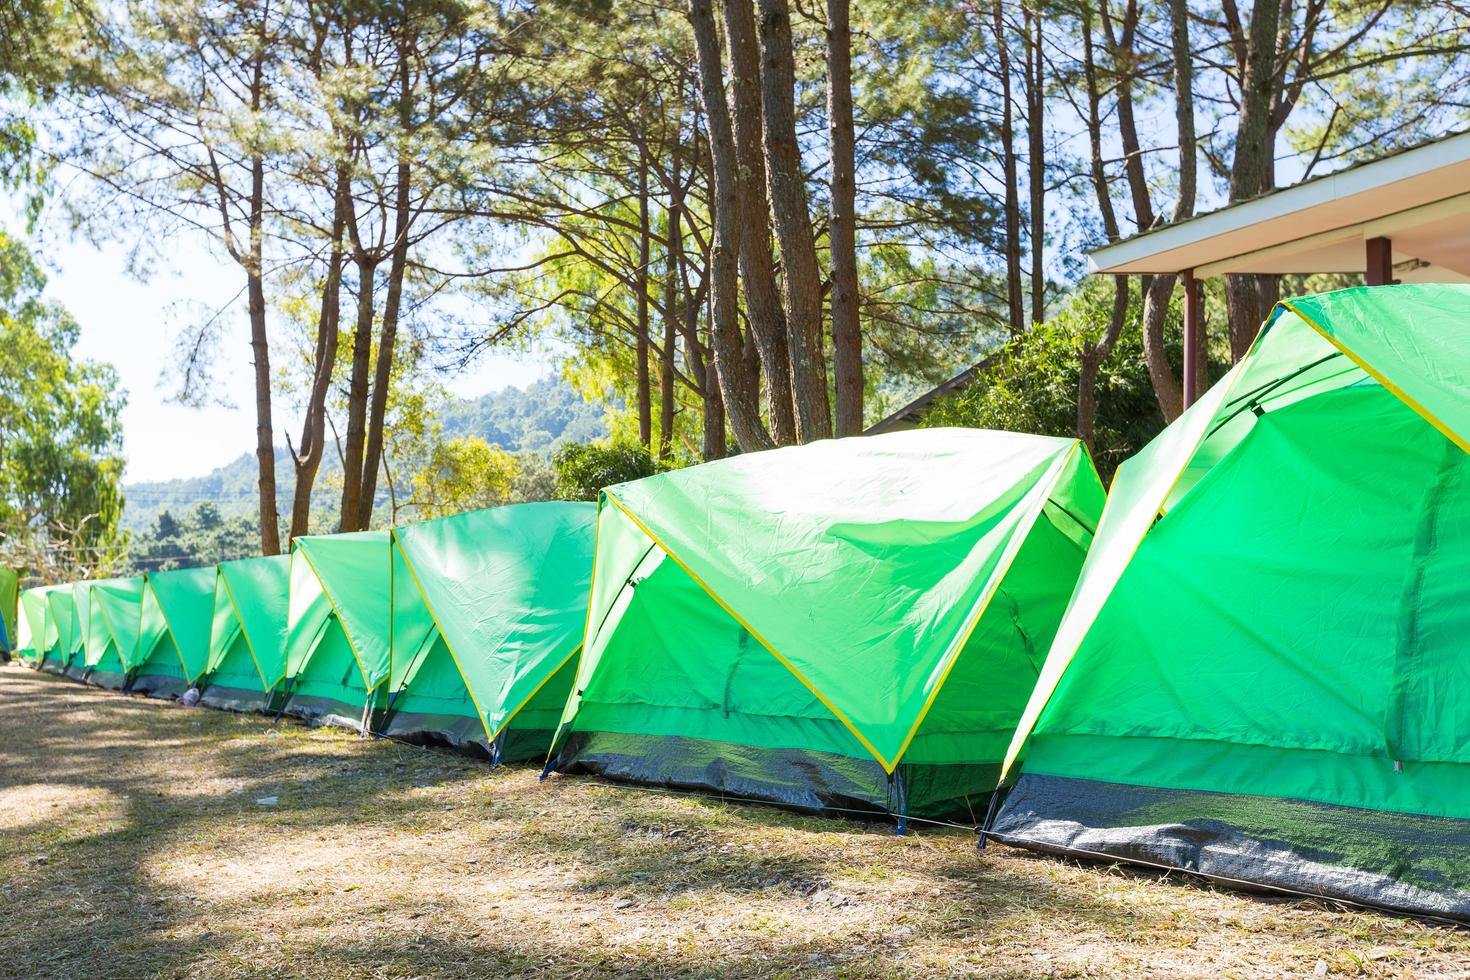 Green tents on the lawn in Thailand photo